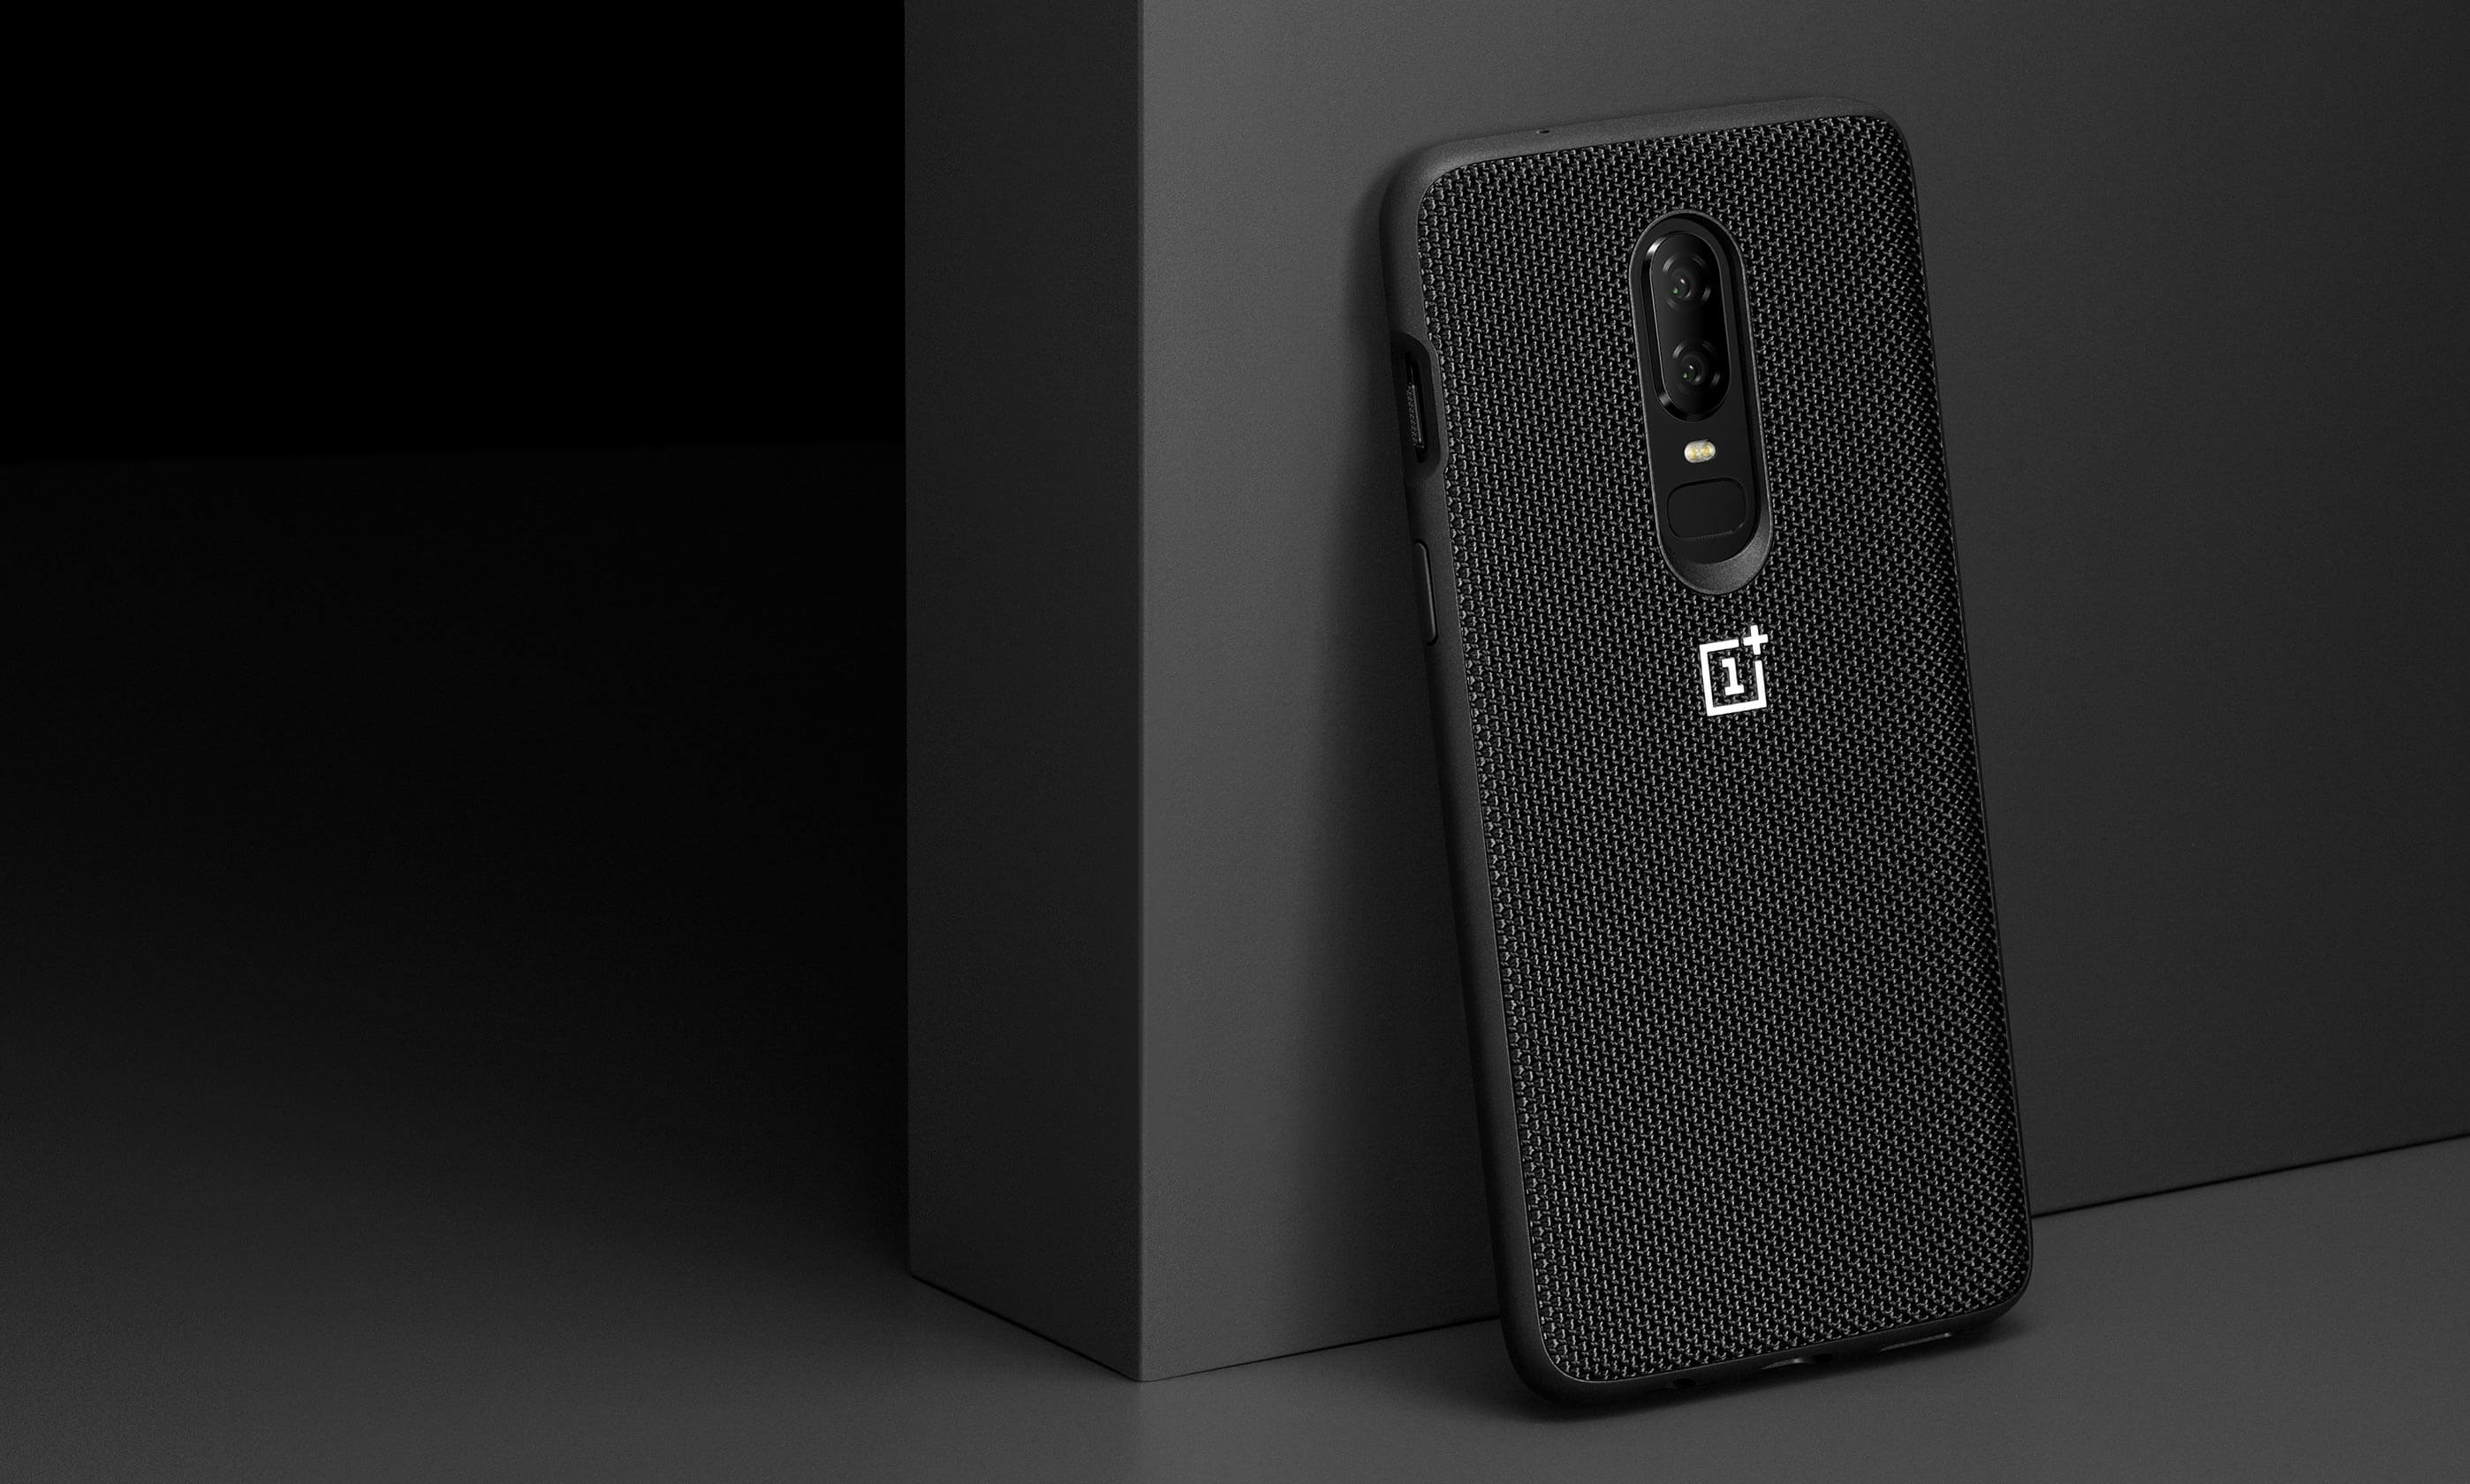 https://opstatics.com/store/20170907/assets/images/products/oneplus-6/bumper-case/pc/screen_nylon1.jpg